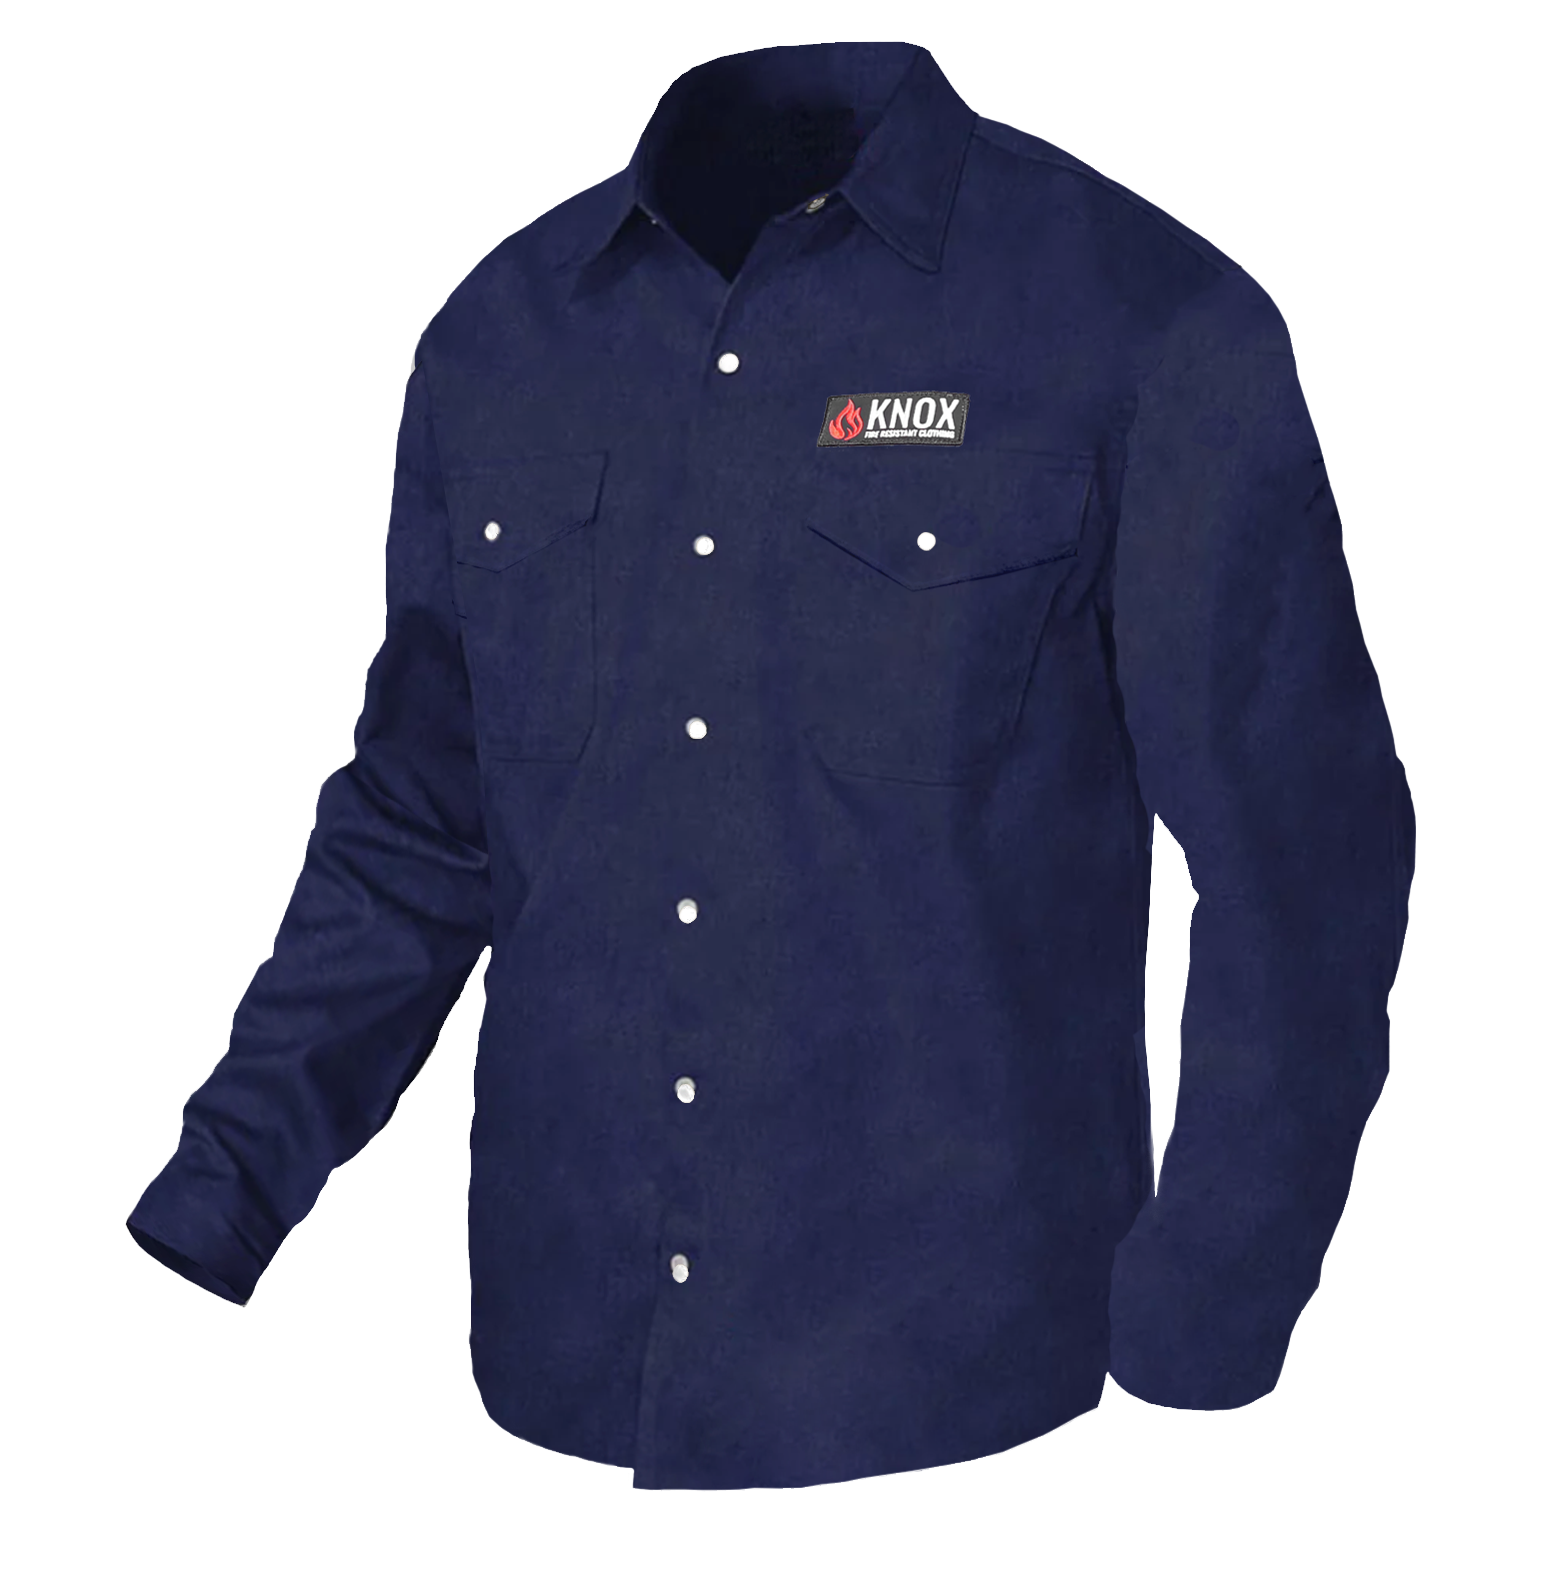 Knox FR Shirt Denim With Pearl Snap Buttons